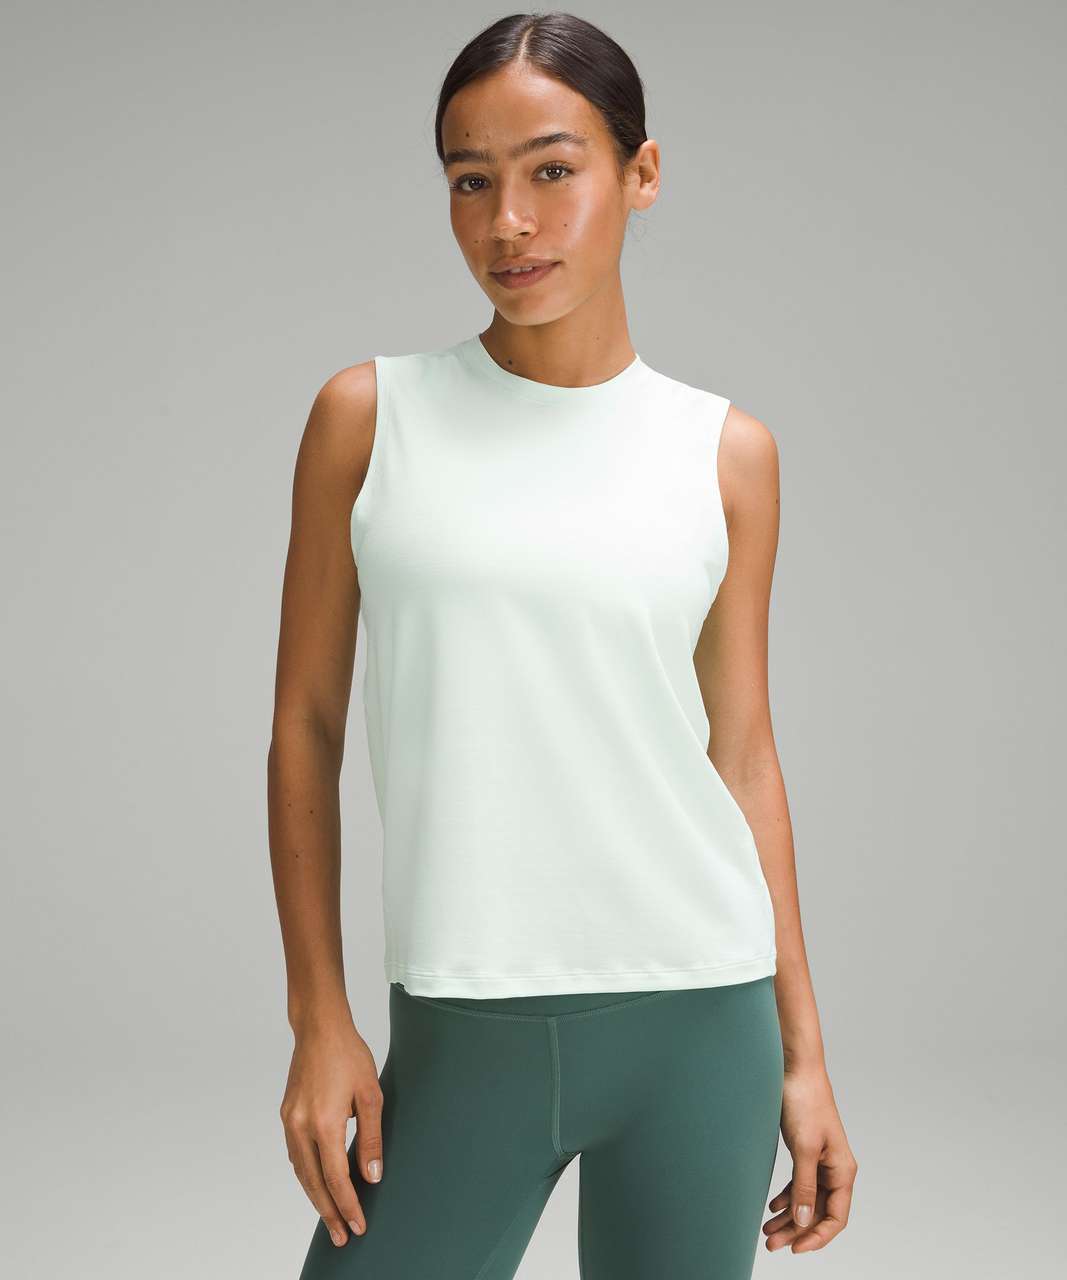 Lululemon License to Train Classic-Fit Tank Top - Heathered Mint Moment